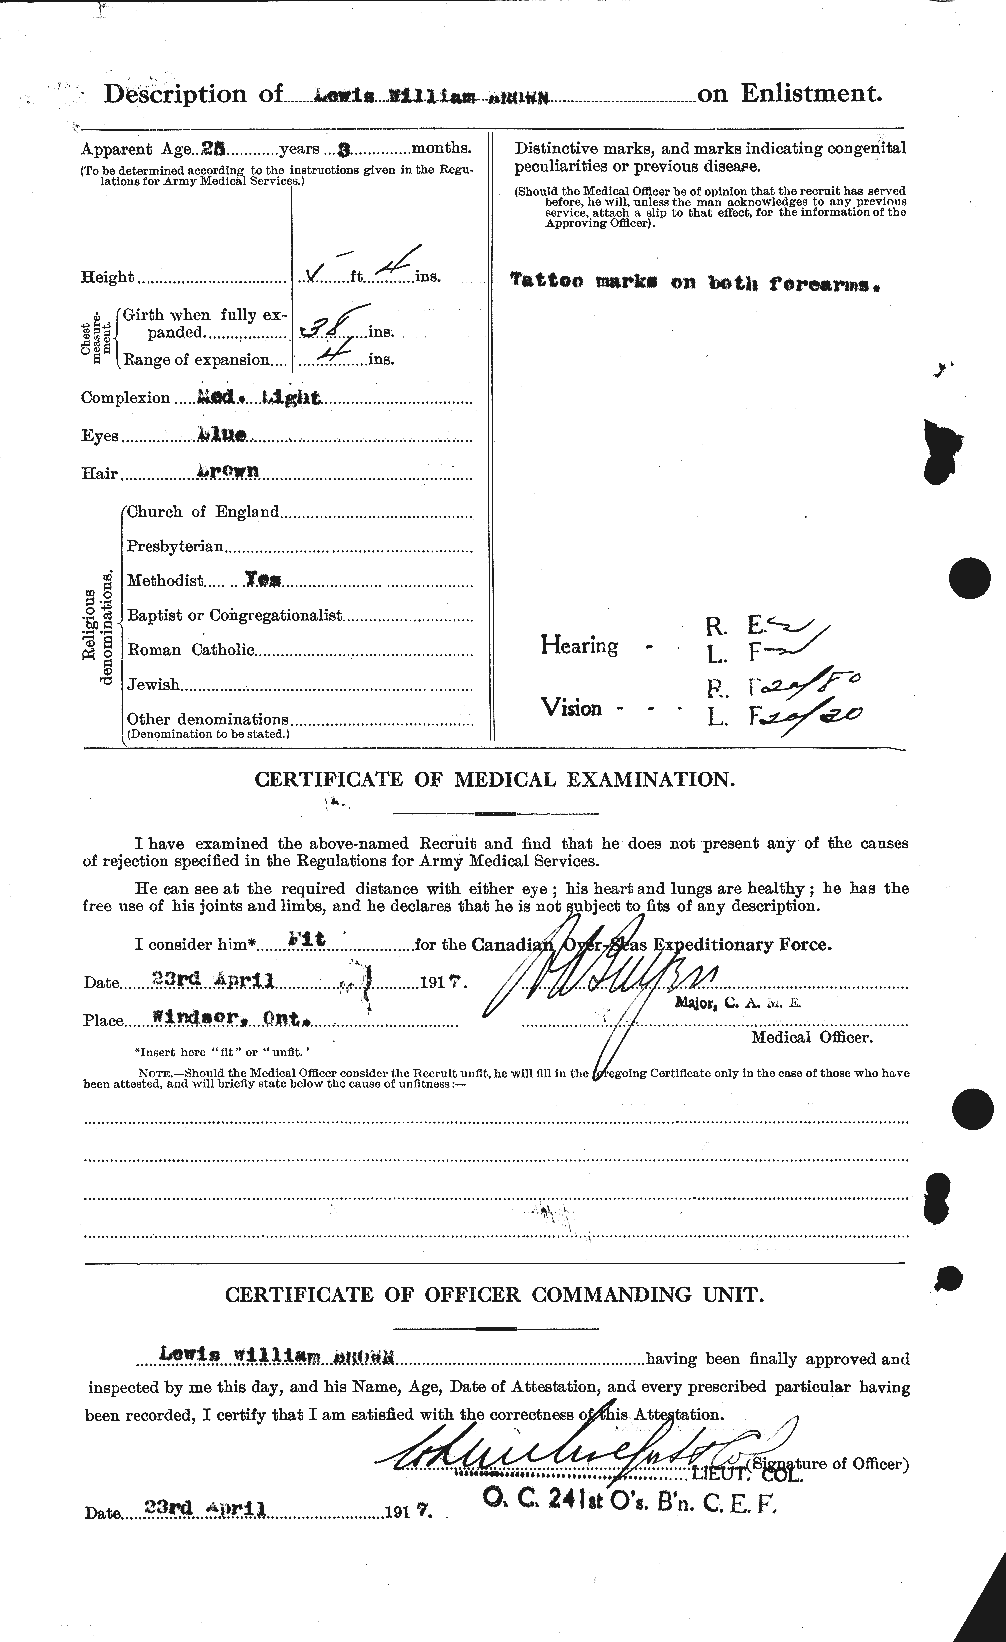 Personnel Records of the First World War - CEF 266320b